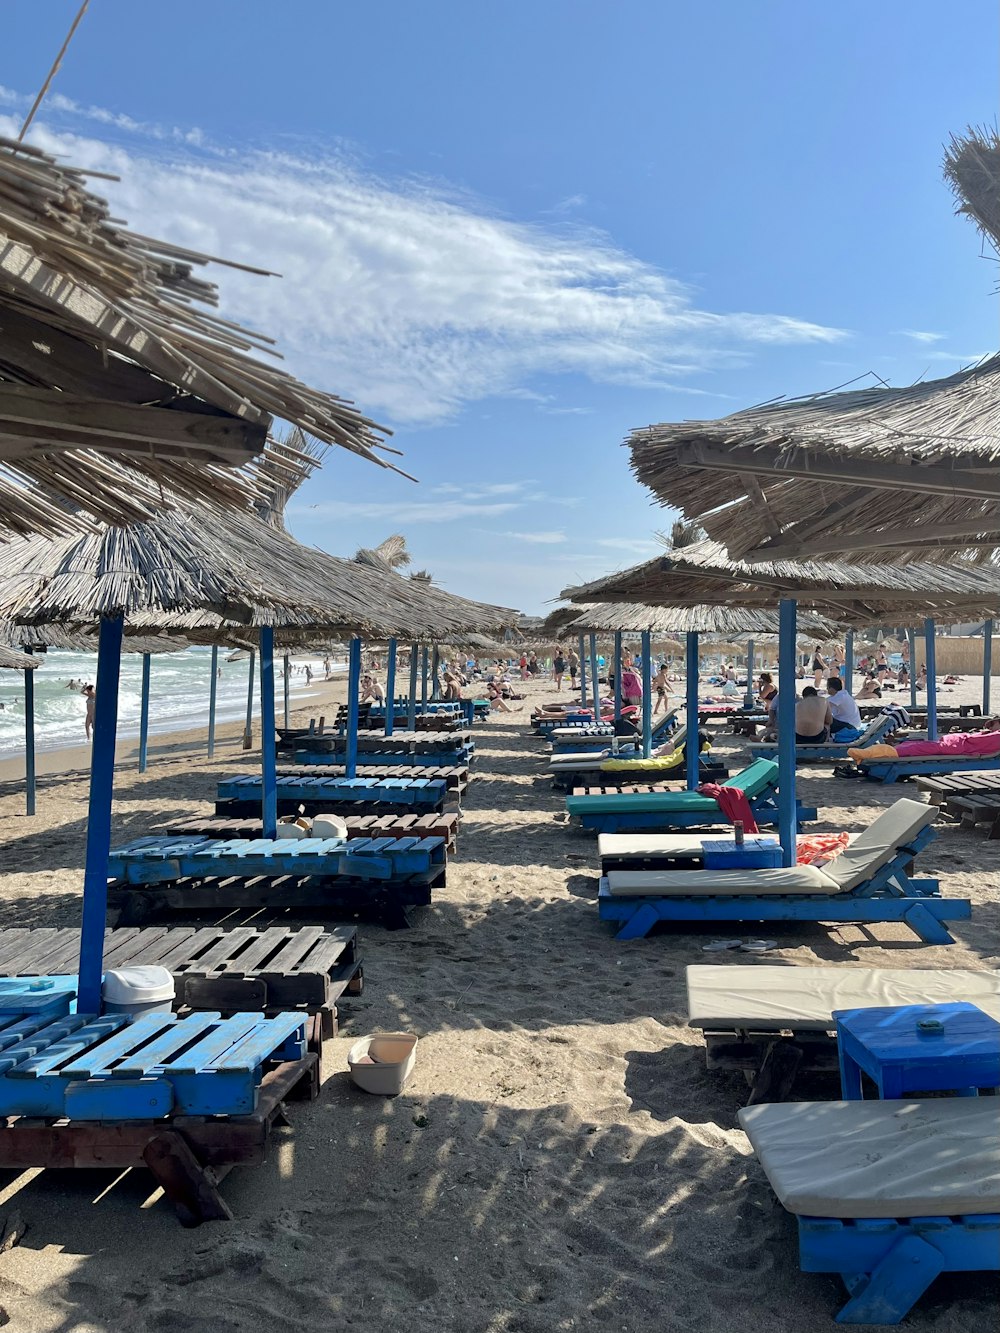 a sandy beach covered in lots of umbrellas and lounge chairs